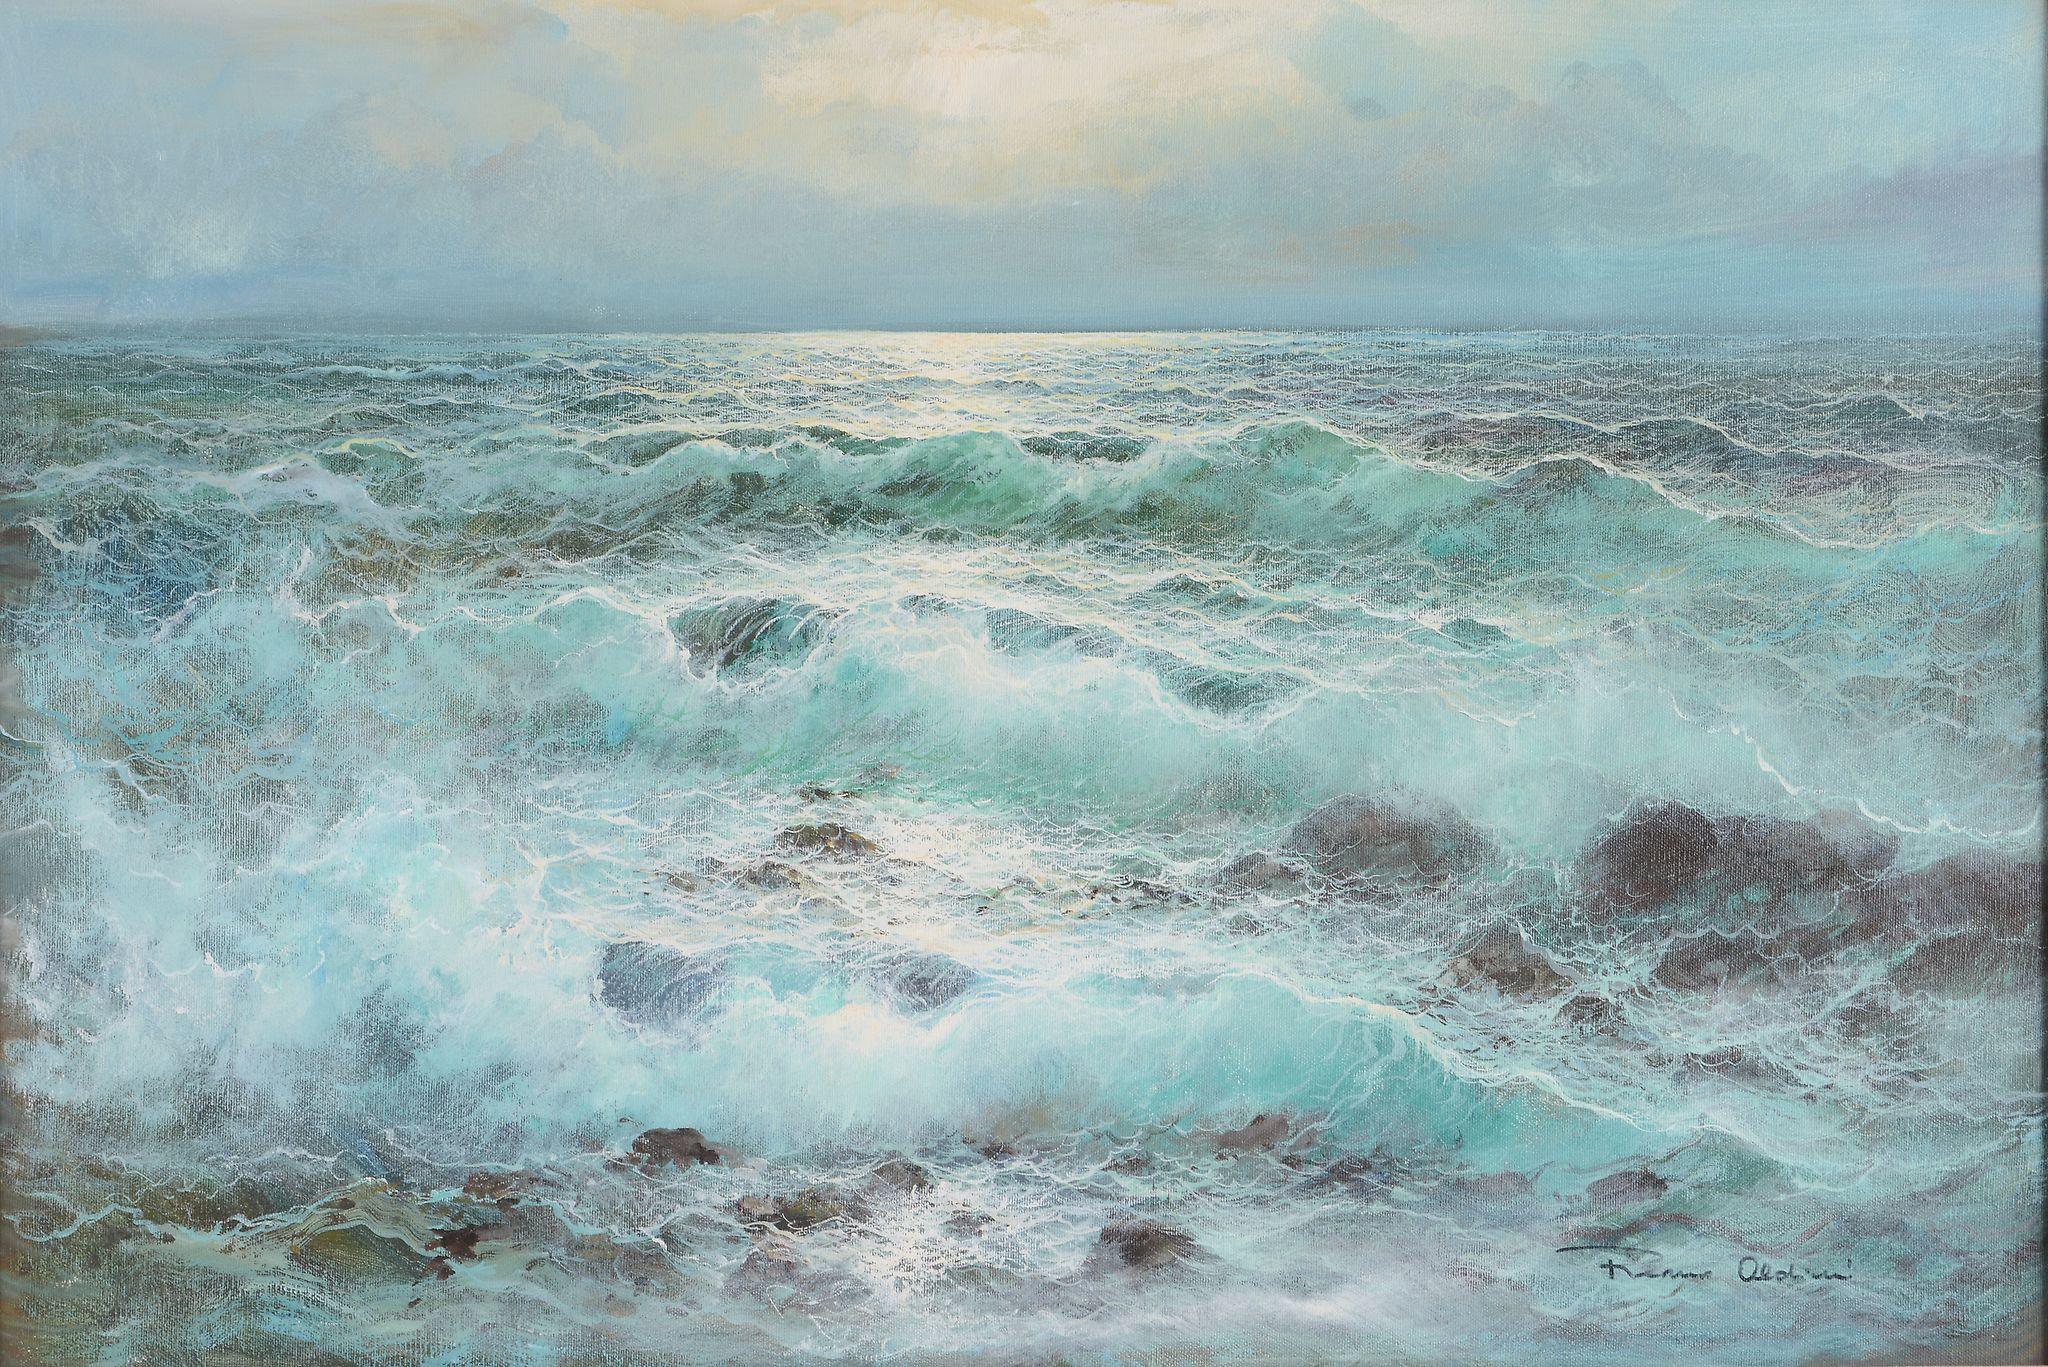 Remo Aldini (b.1943) - Waves Oil on canvas  Signed lower right 60.5 x 90 cm. (23 3/4 x 35 1/2 in)